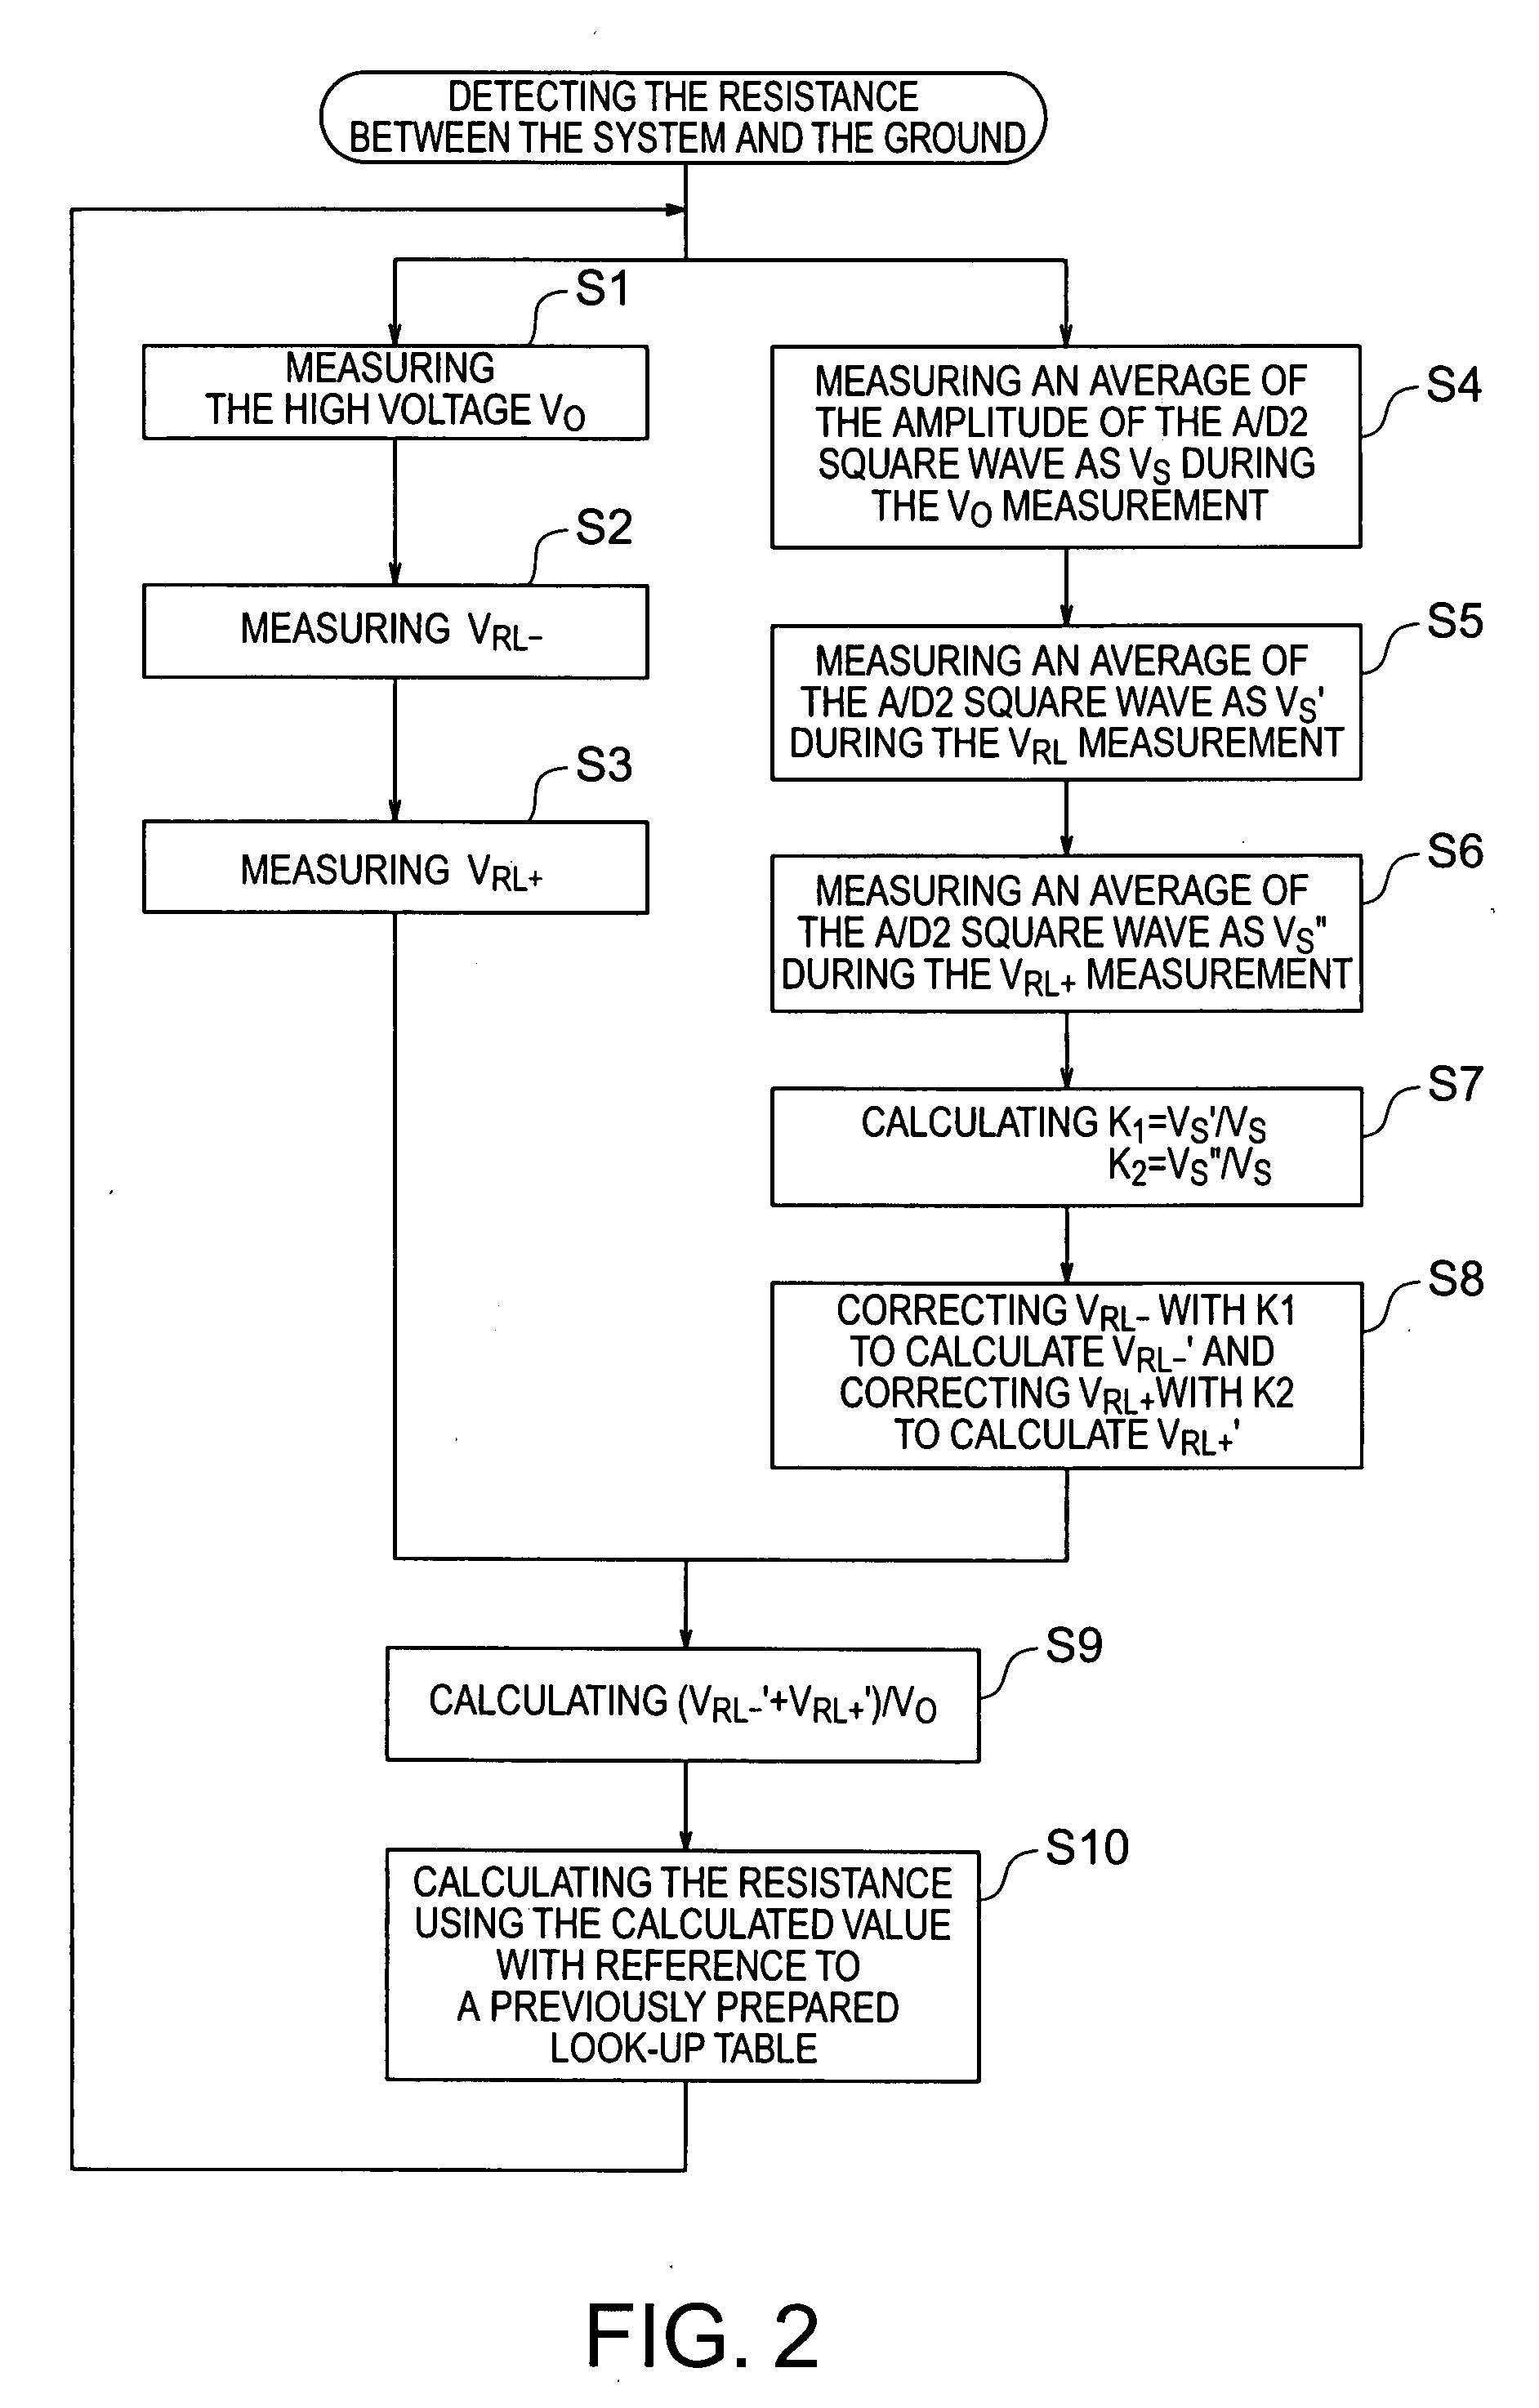 Insulation detecting method and insulation detecting device